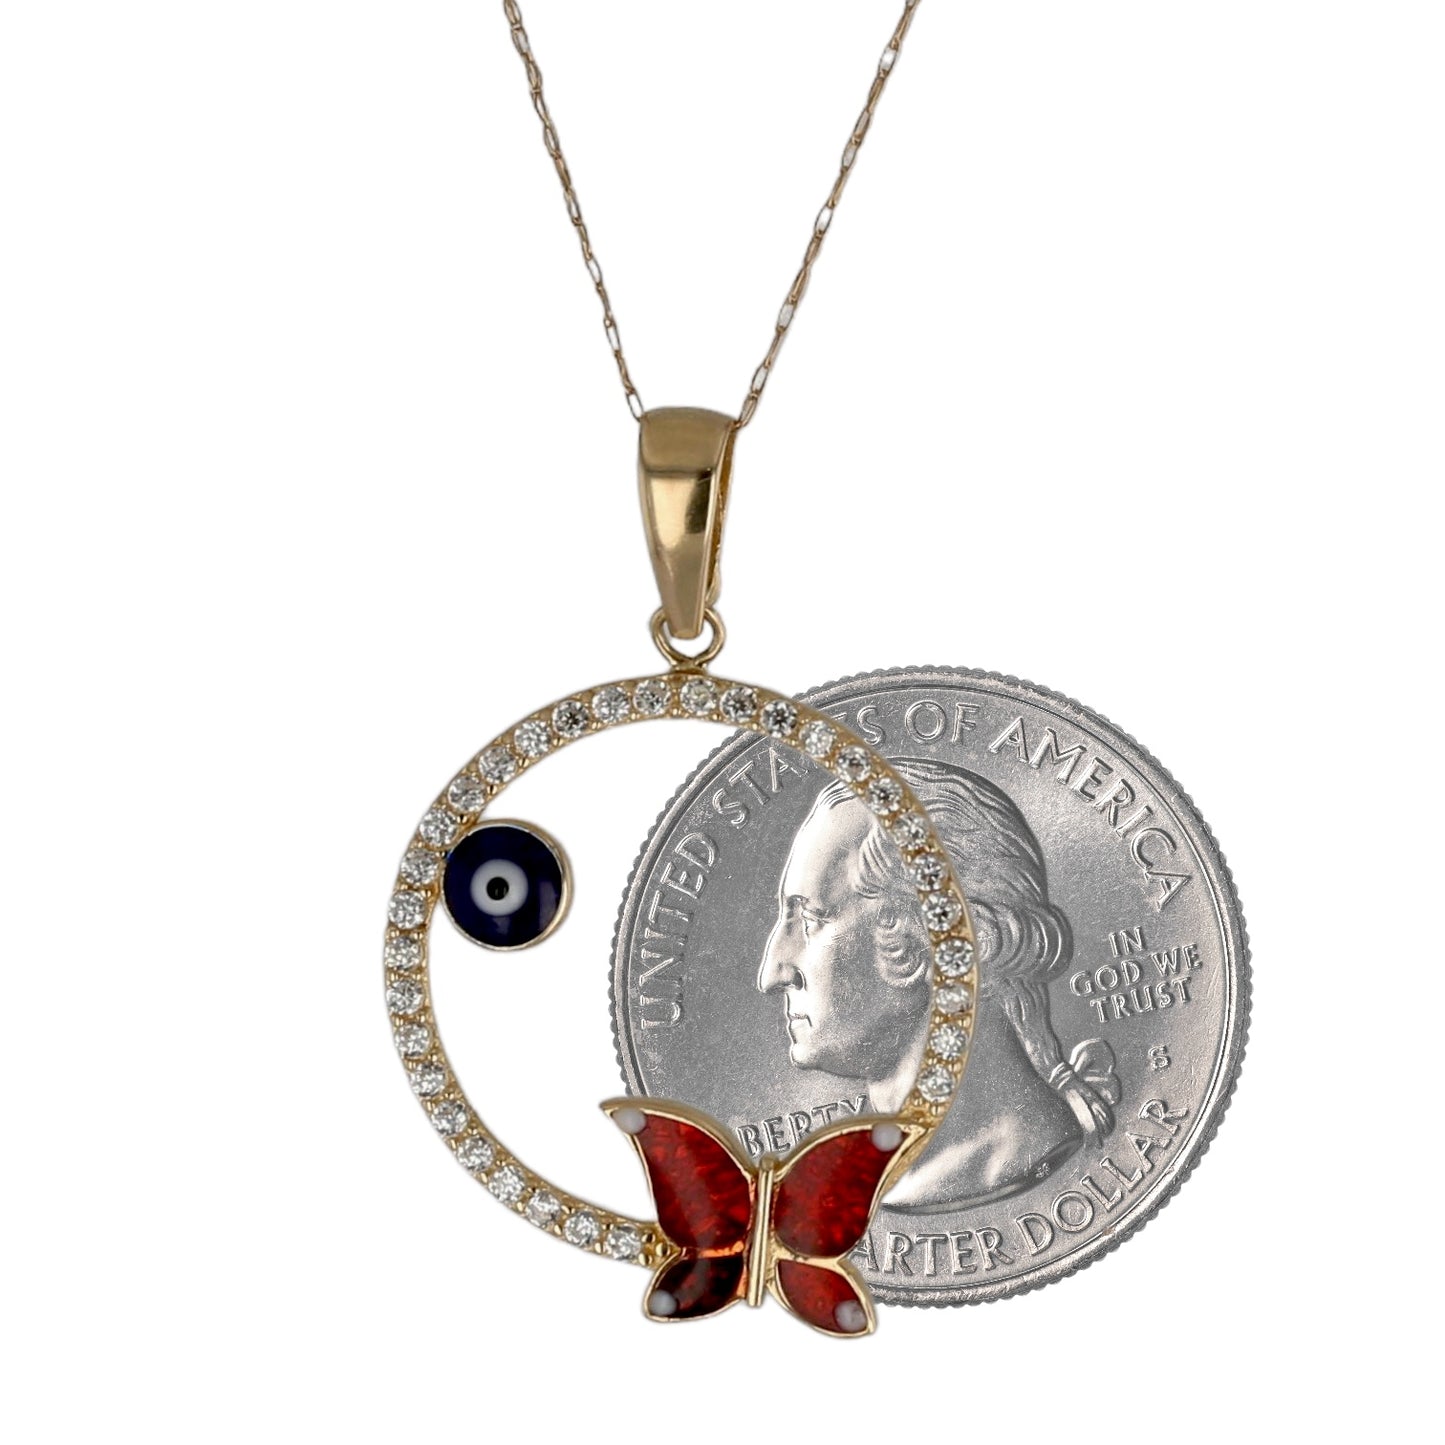 14K Yellow gold red butterfly pendant singapore chain-528399